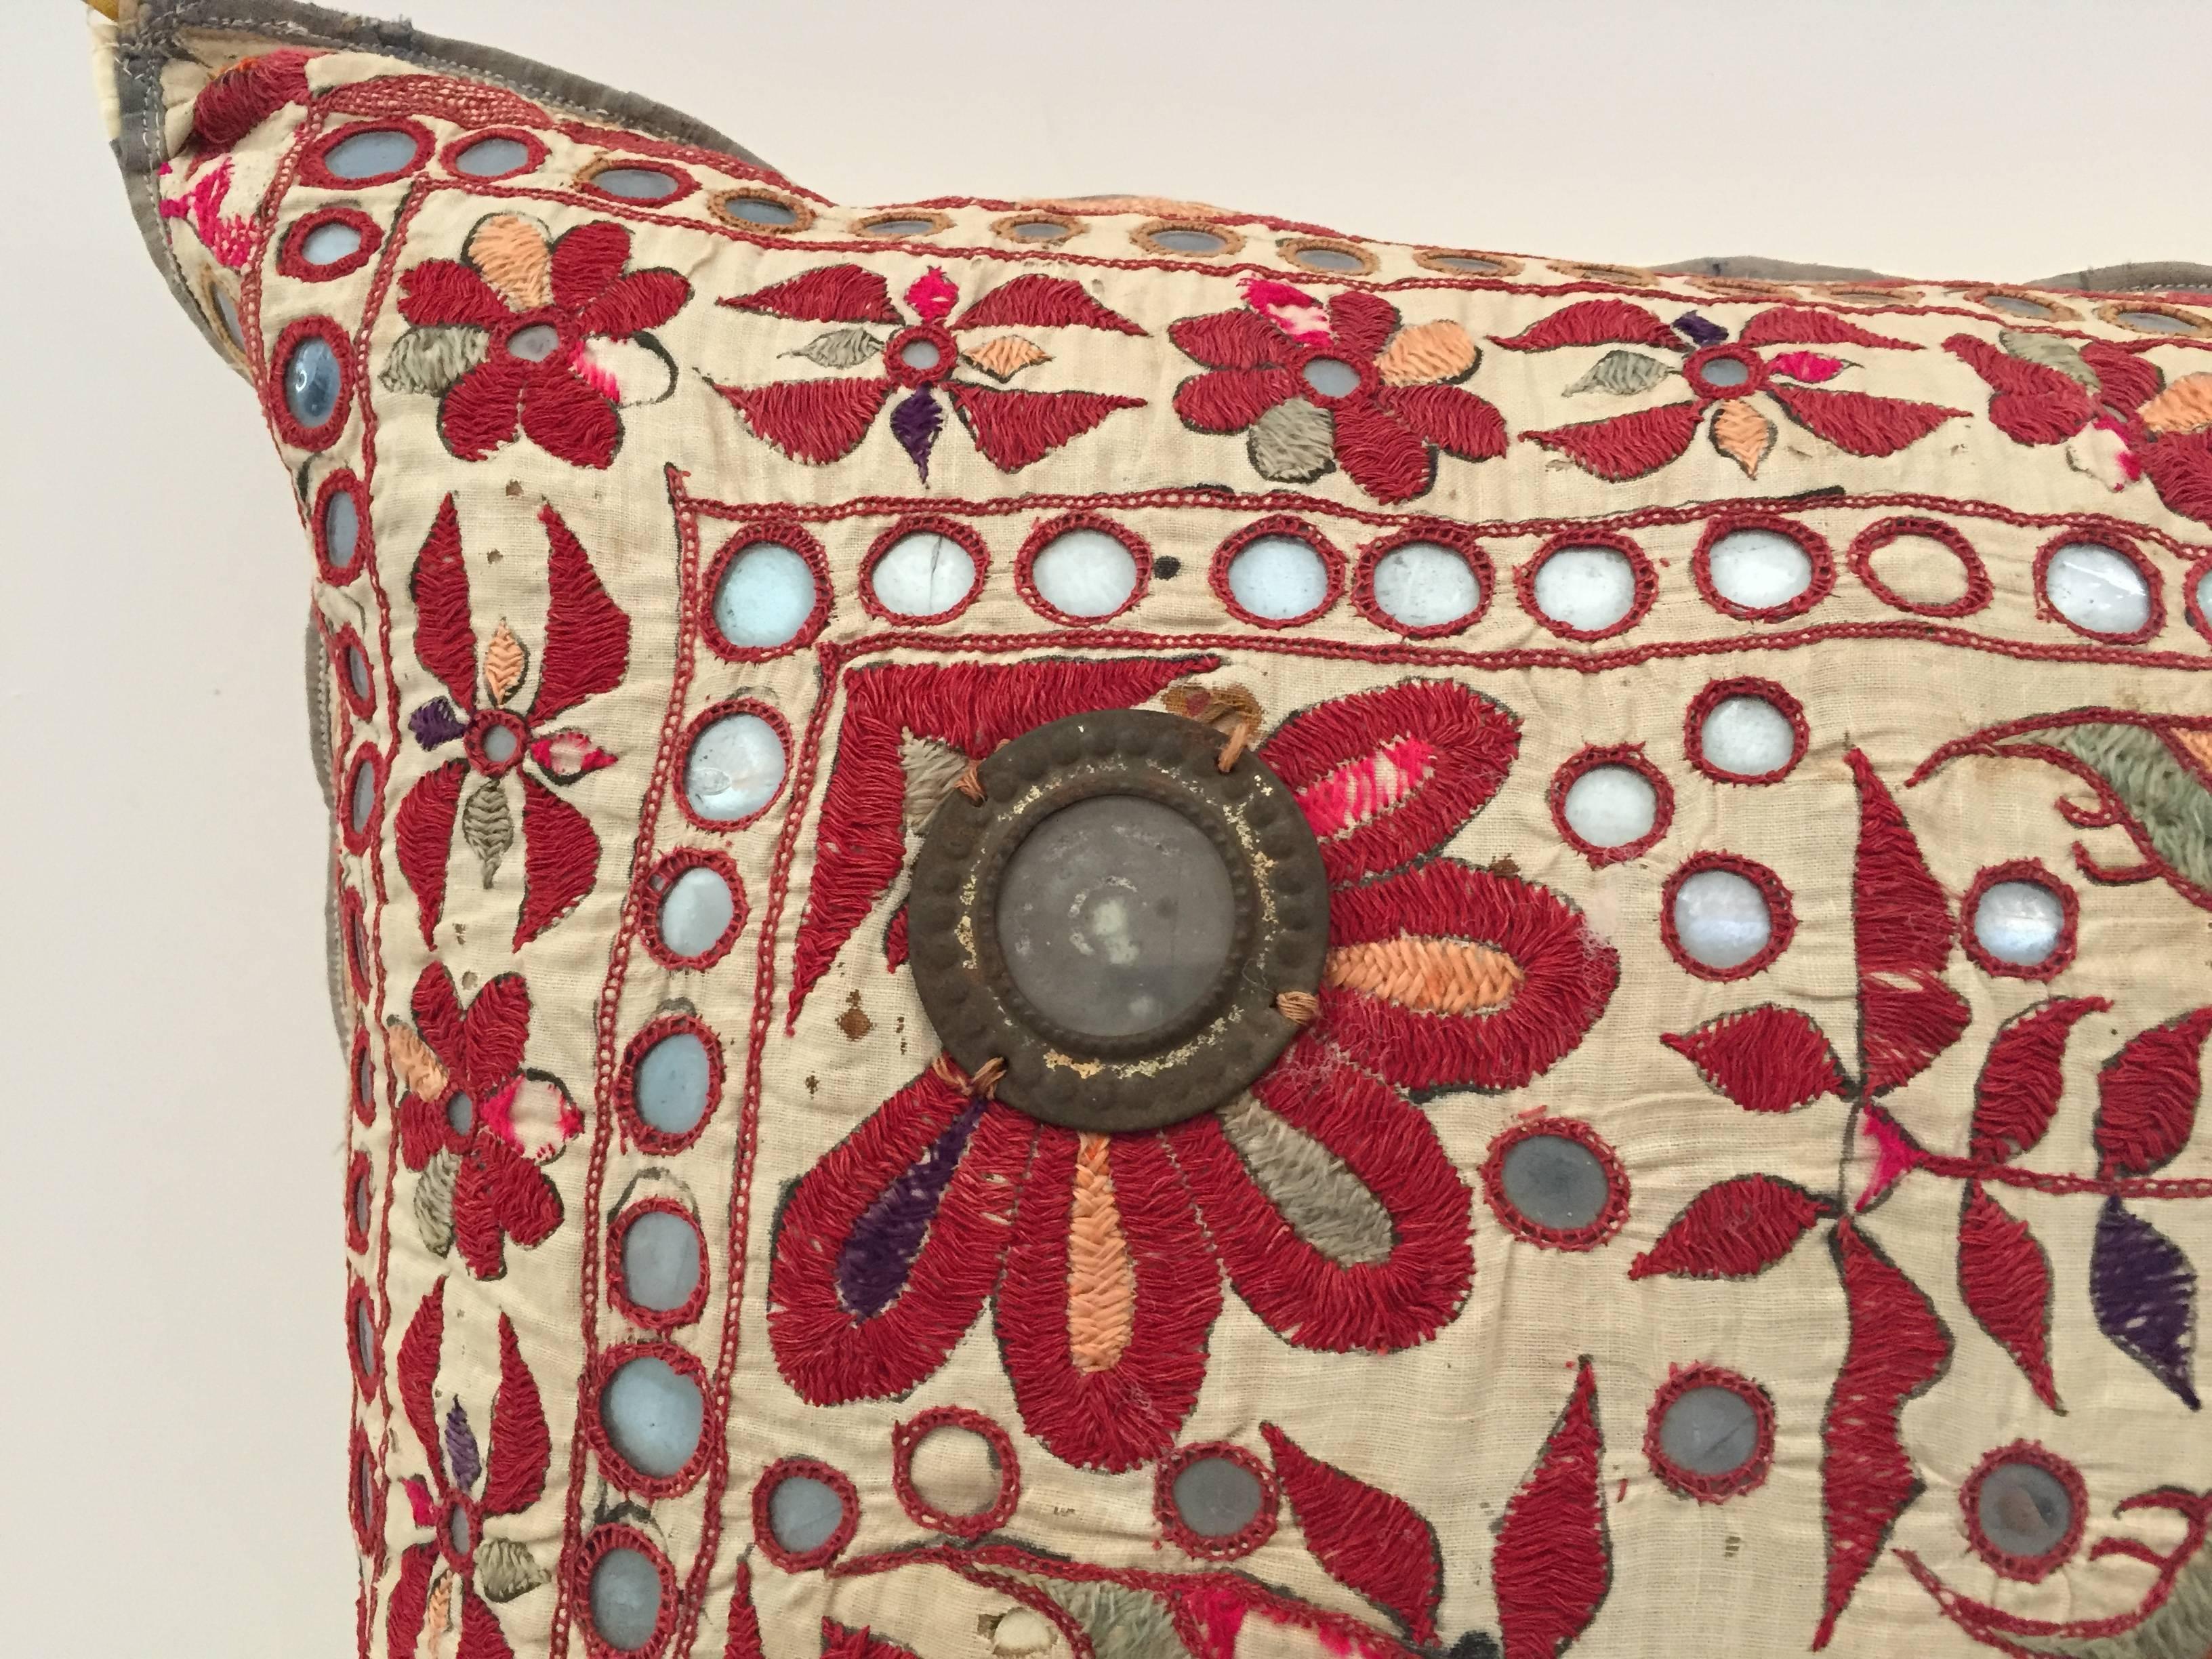 19th century, Rajasthani colorful embroidery textile made into a decorative throw pillow.
Handcrafted with floral pattern embroidered with silk thread and embellished with small metal mirrors depicting flowers in bloom and birds.
In shade of red,